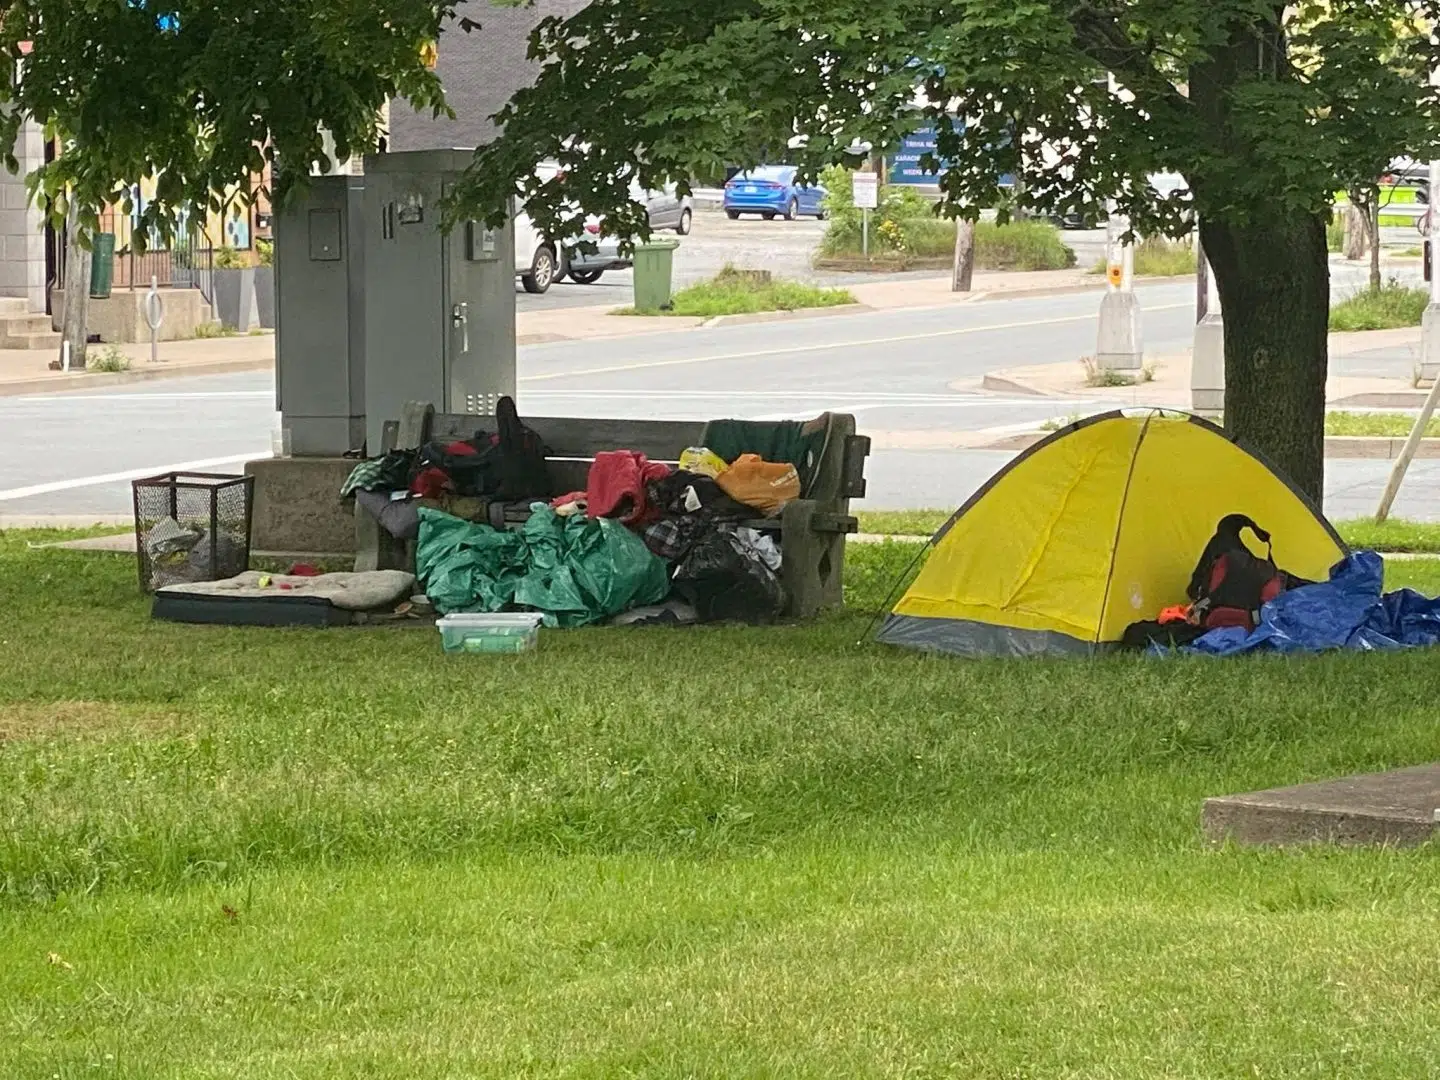 Four Halifax parks approved as tent sites to help homeless